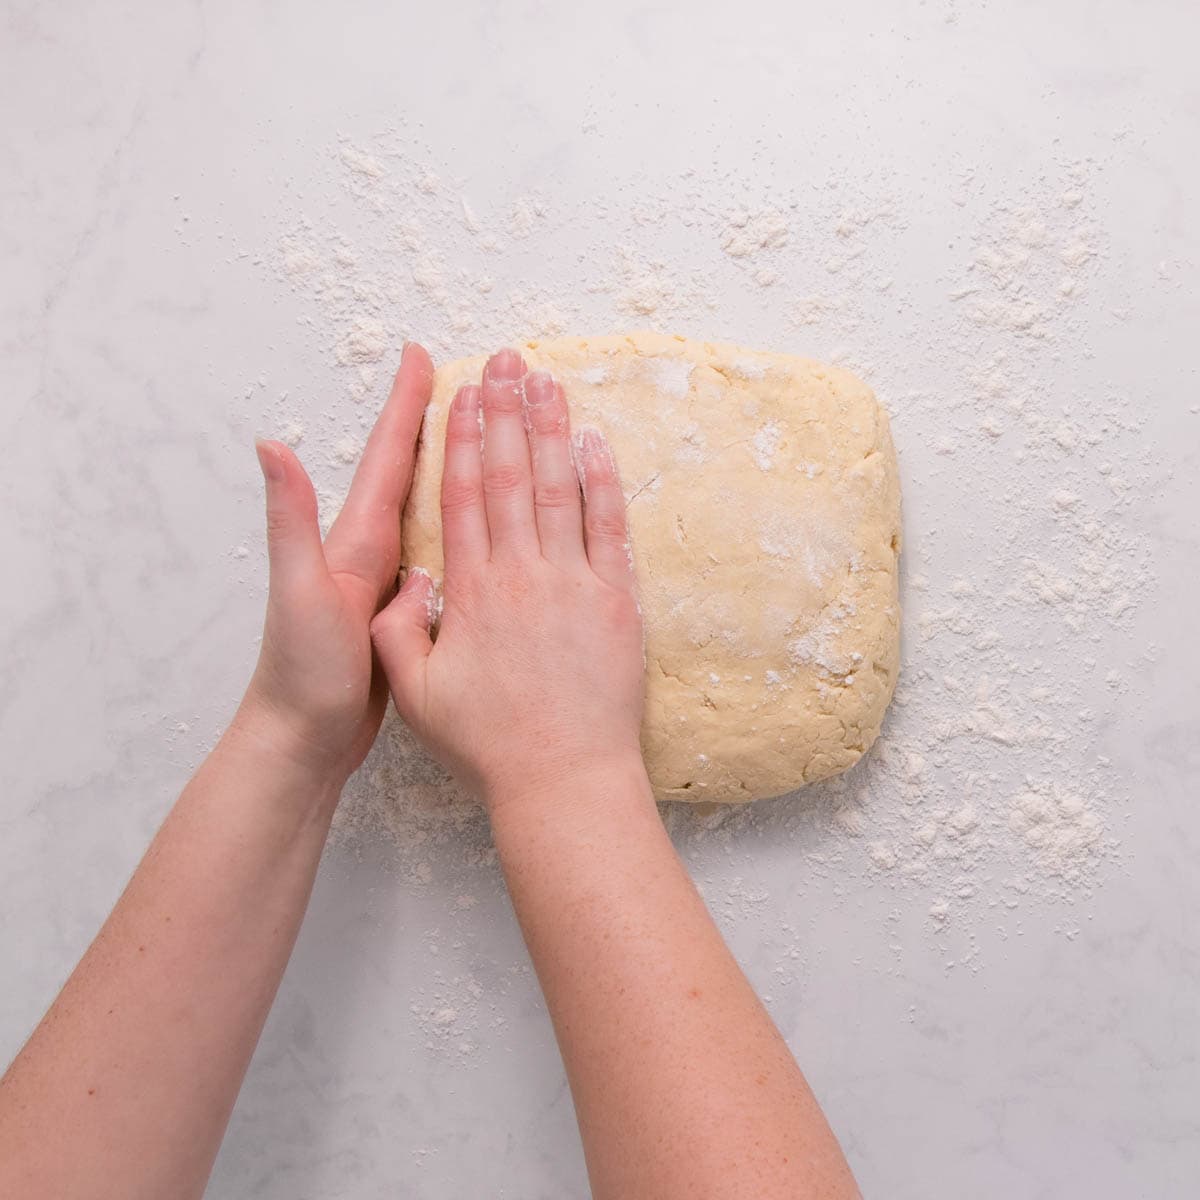 Hands shaping the dough into a square.